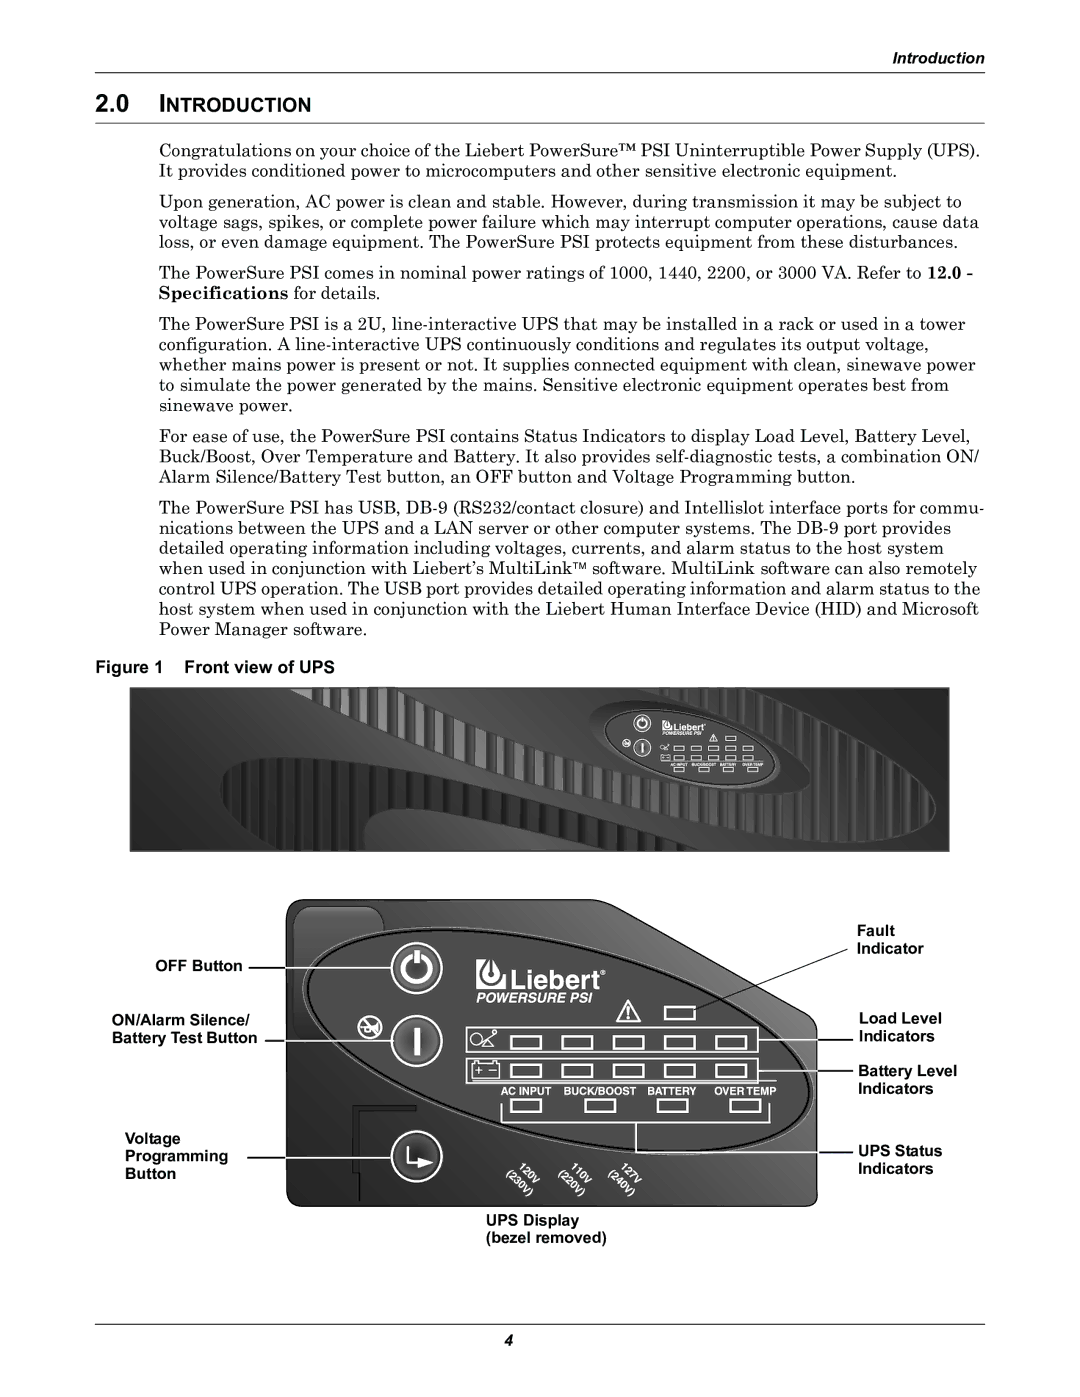 Liebert PSITM user manual Introduction, Front view of UPS 